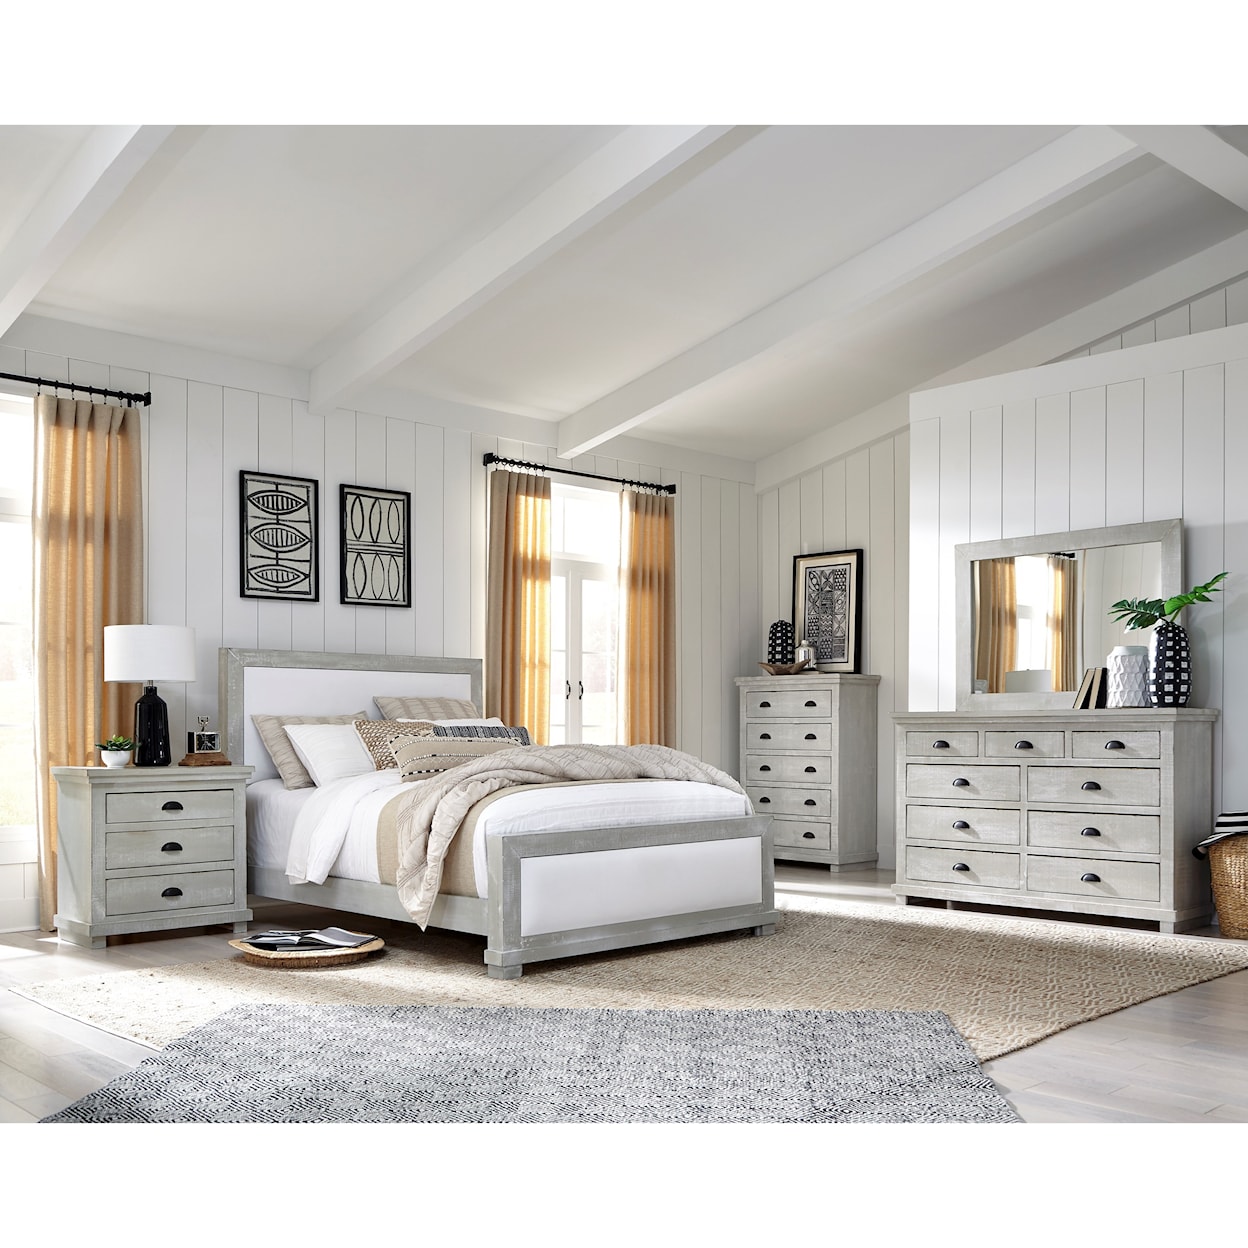 Carolina Chairs Willow Queen Bedroom Group